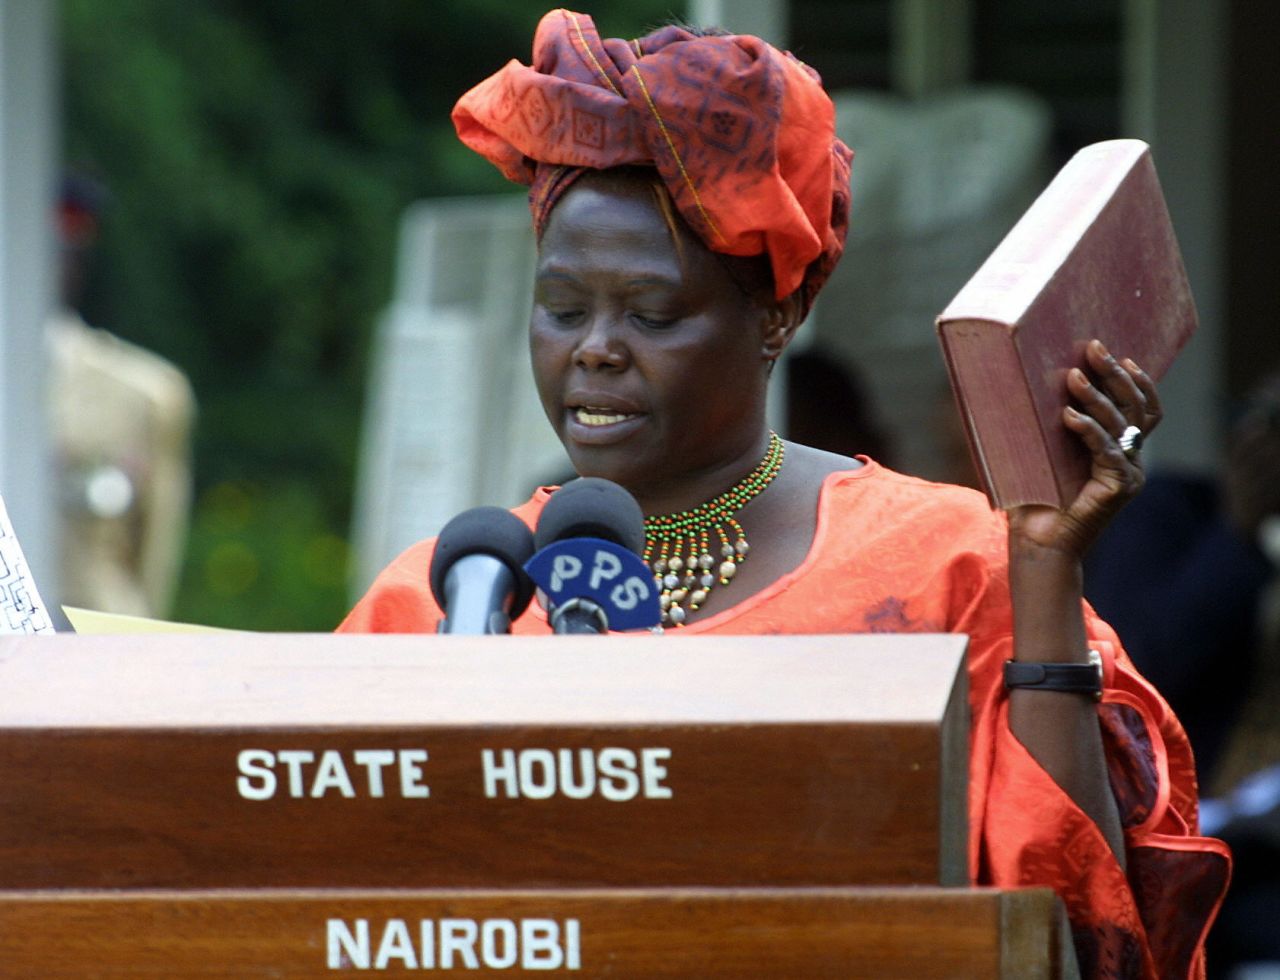 Maathai was a trailblazer throughout her life. She was the first woman in East and Central Africa to earn a doctorate degree and in 2002 was elected to Kenya's parliament with 98 percent of the vote.